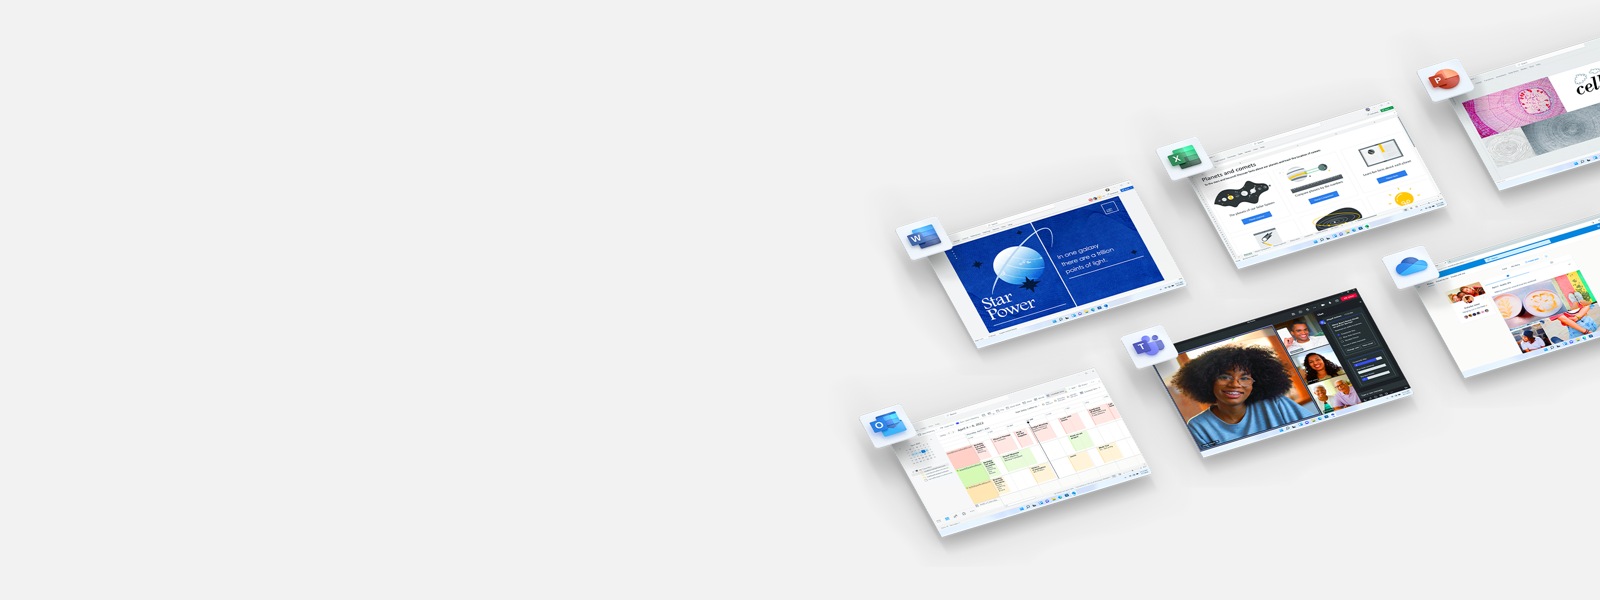 Screens and app icons for Office apps that are part of Microsoft 365